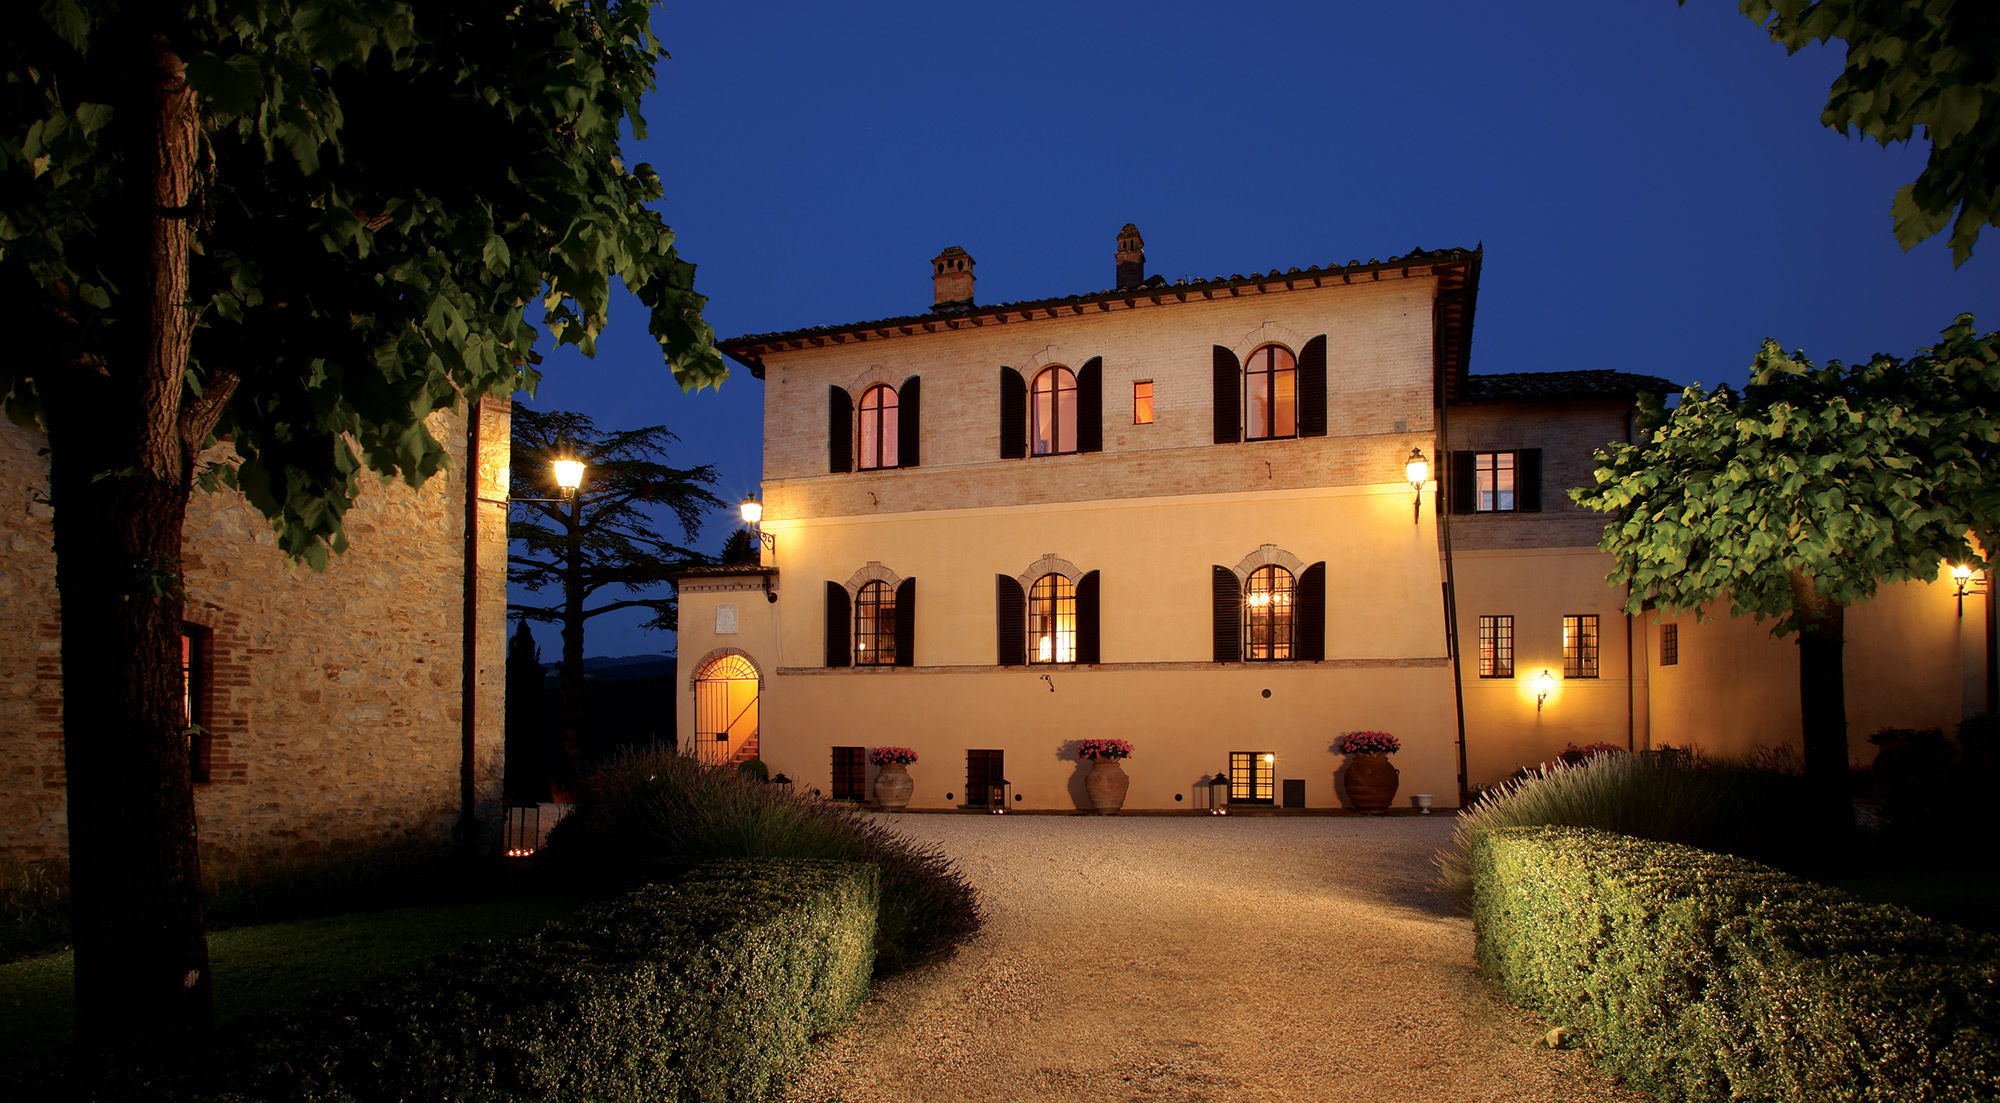 Luxury Tuscany villa. One of the most executed rent house for your holiday